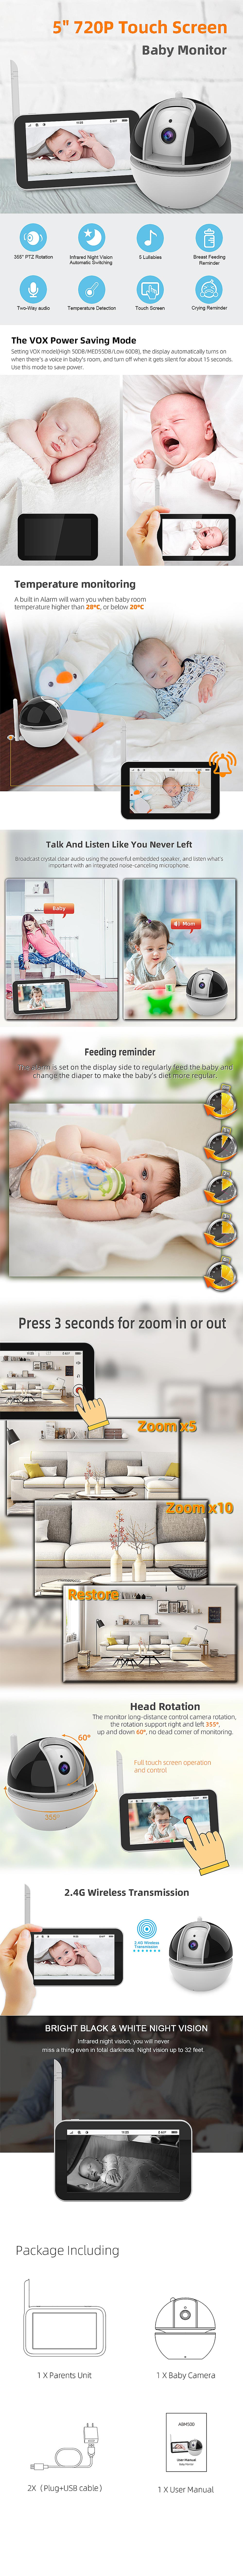 AM540 720P 5inch Baby Monitor with PTZ Rotation Camera Temperature Monitoring IR Night Vision Touch Screen Crying Breast Feeding Reminder Lullabies Baby Watcher Camera Device